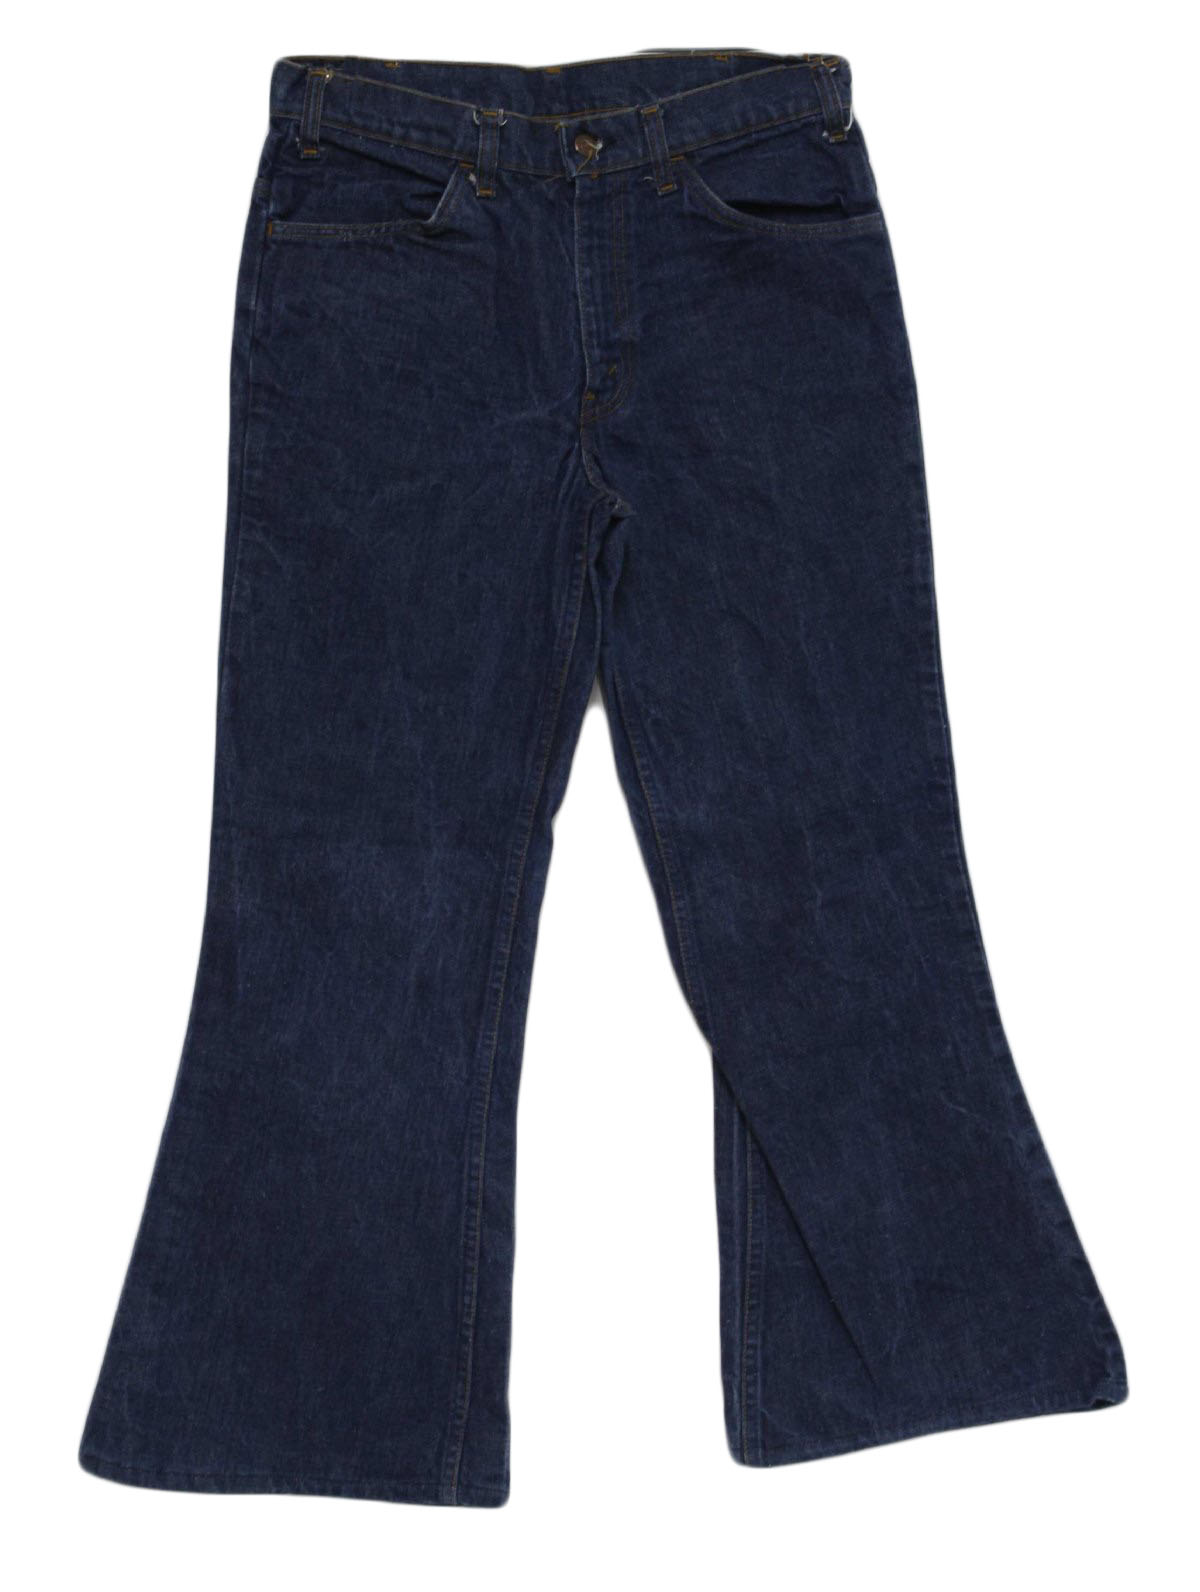 Retro 60's Bellbottom Pants: Late 60s or early 70s -Levis- Mens dark ...